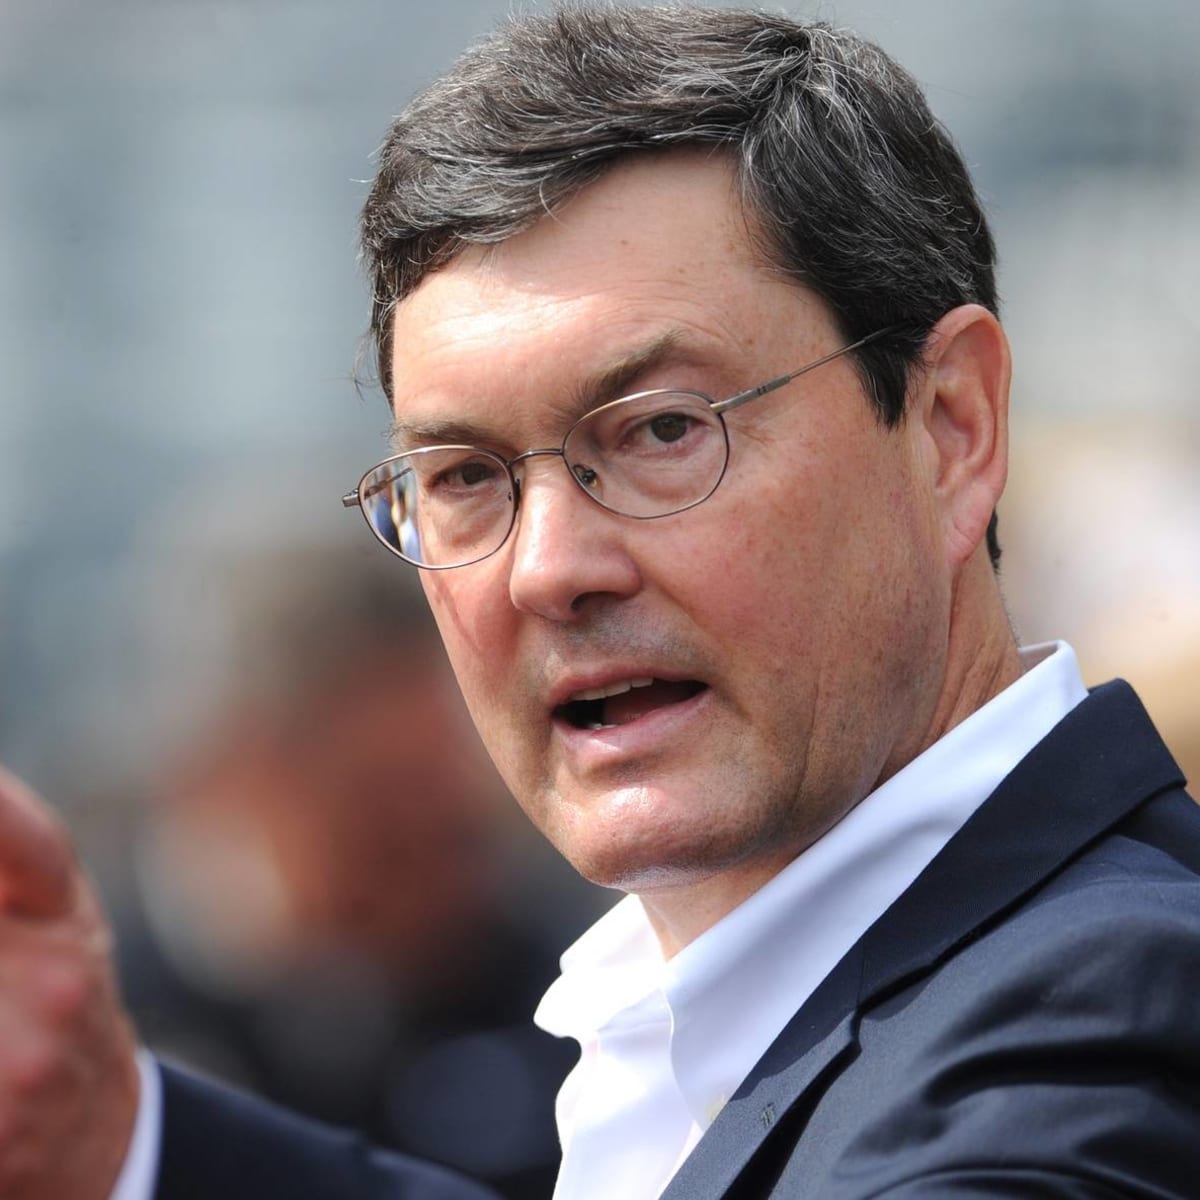 Thousands sign petition urging Pirates owner Bob Nutting to sell